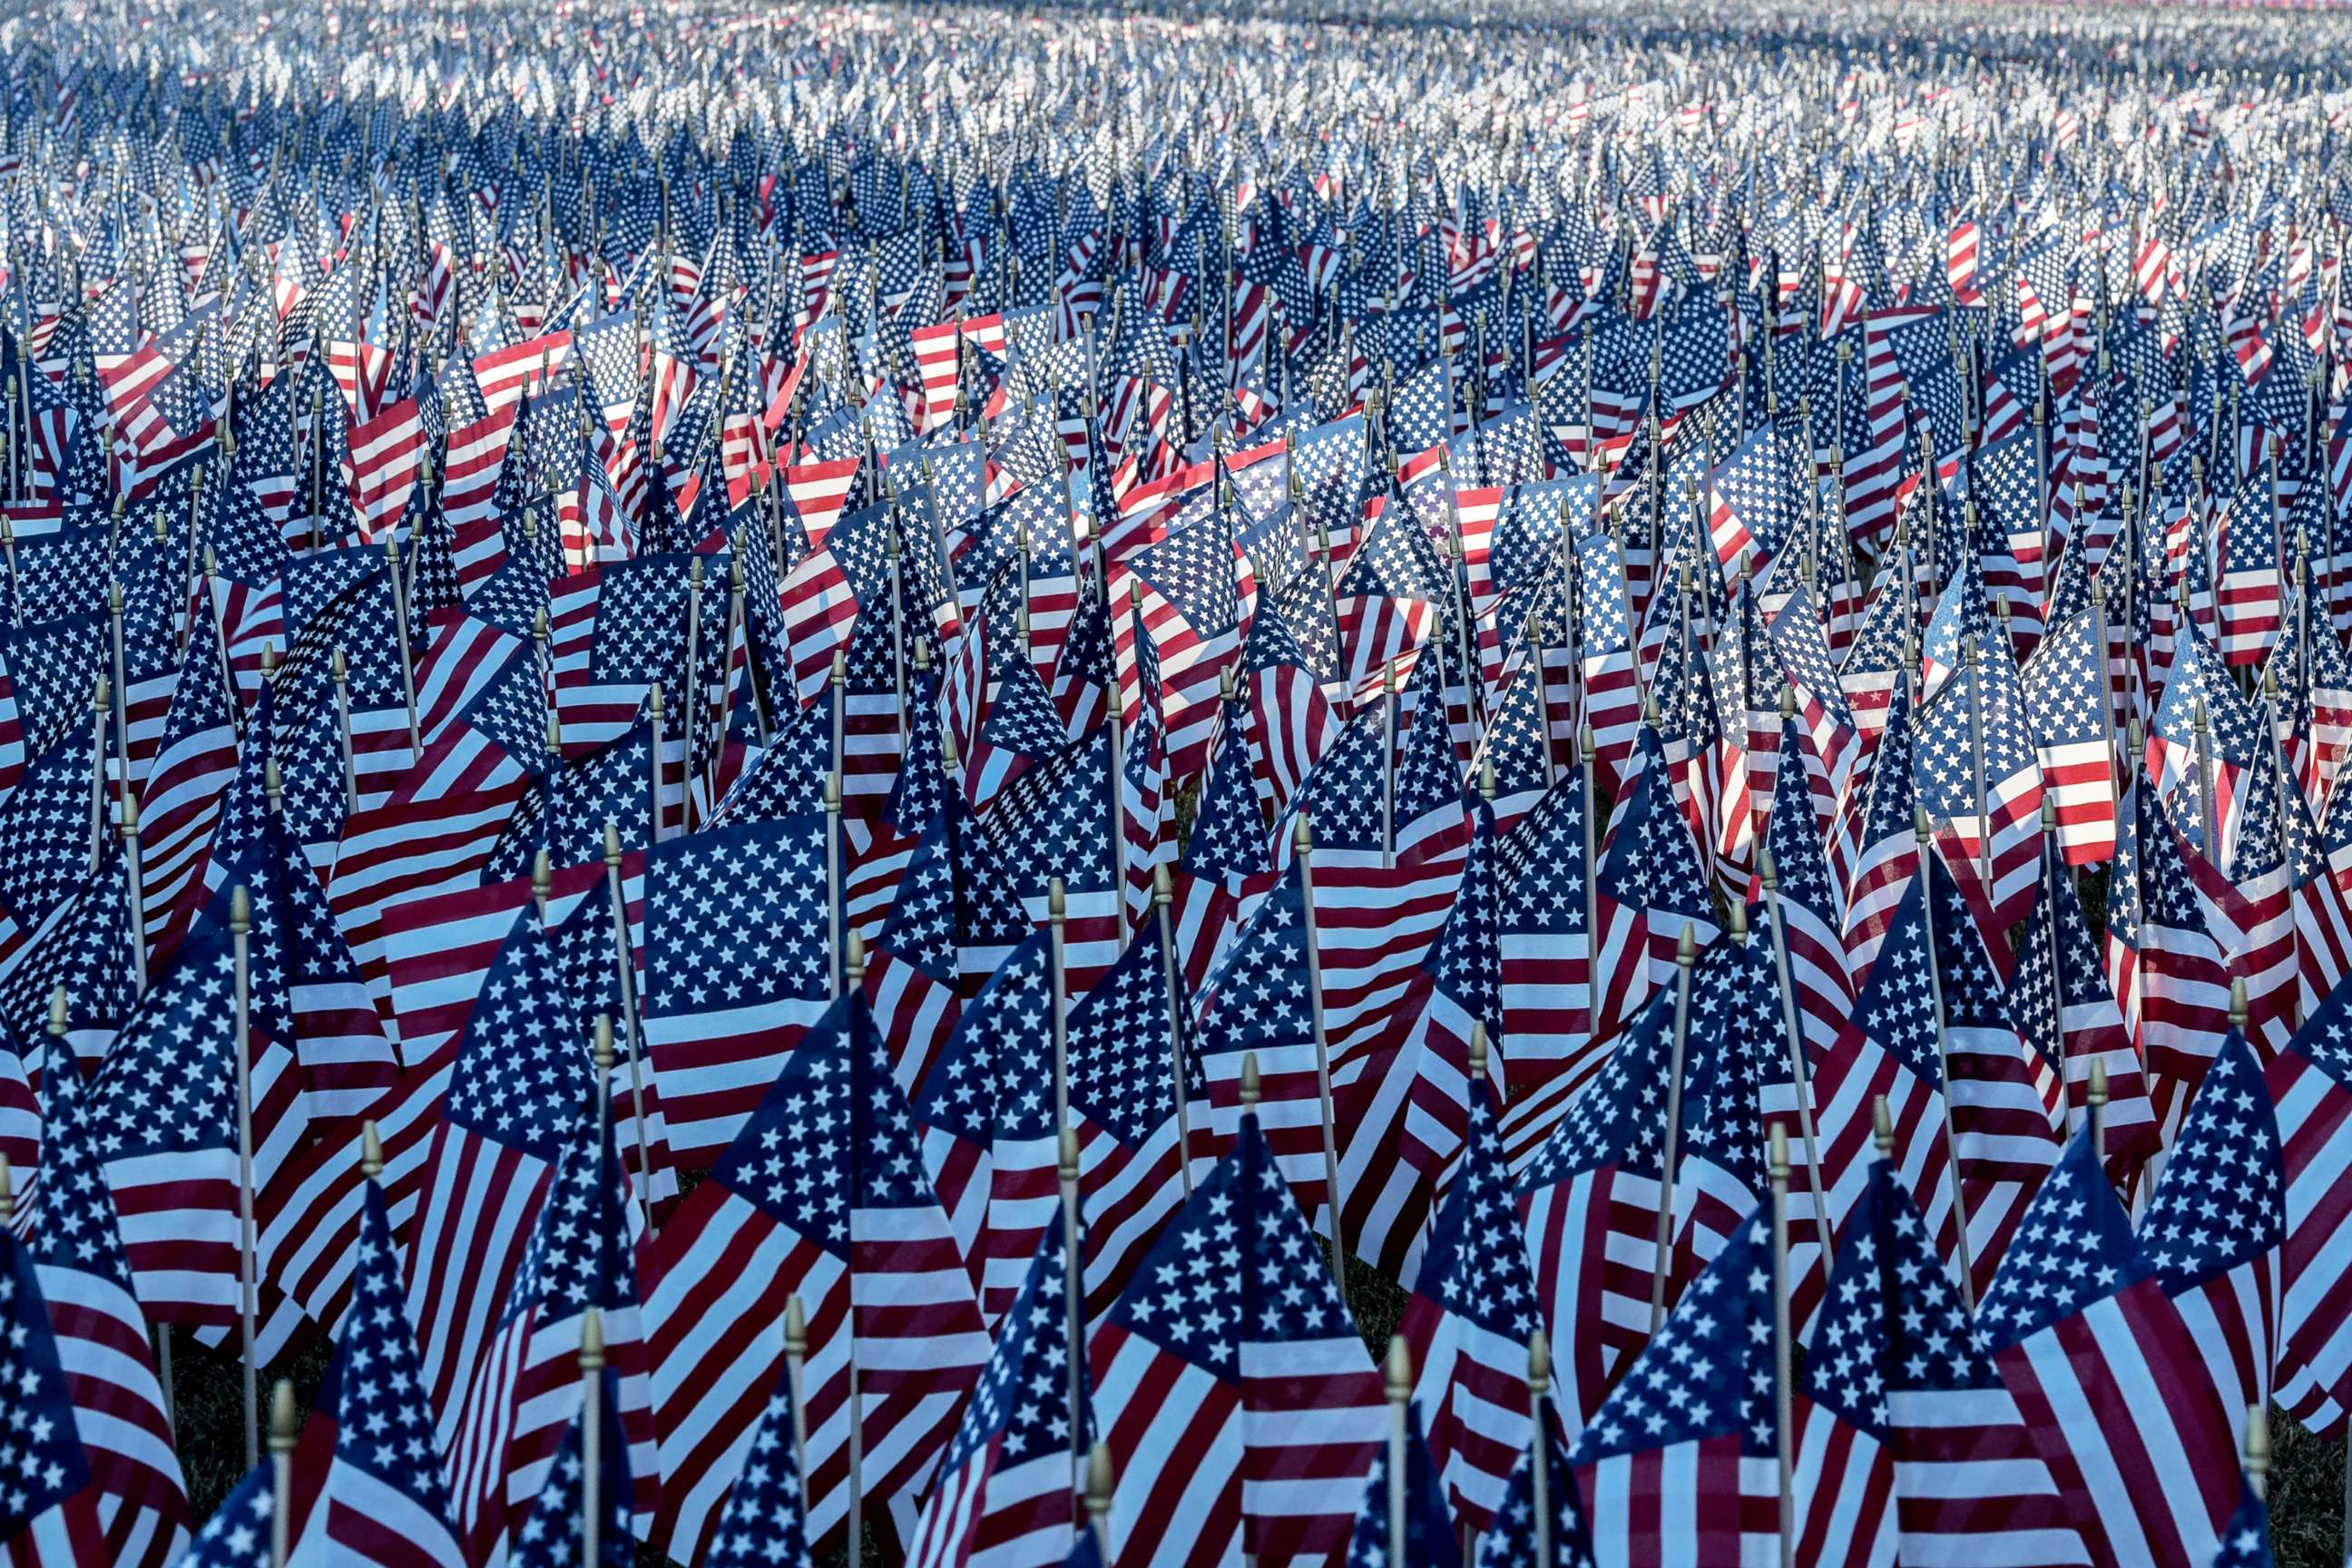 PHOTO: The National Mall in Washington is filled with decorative flags on Jan. 19, 2021.